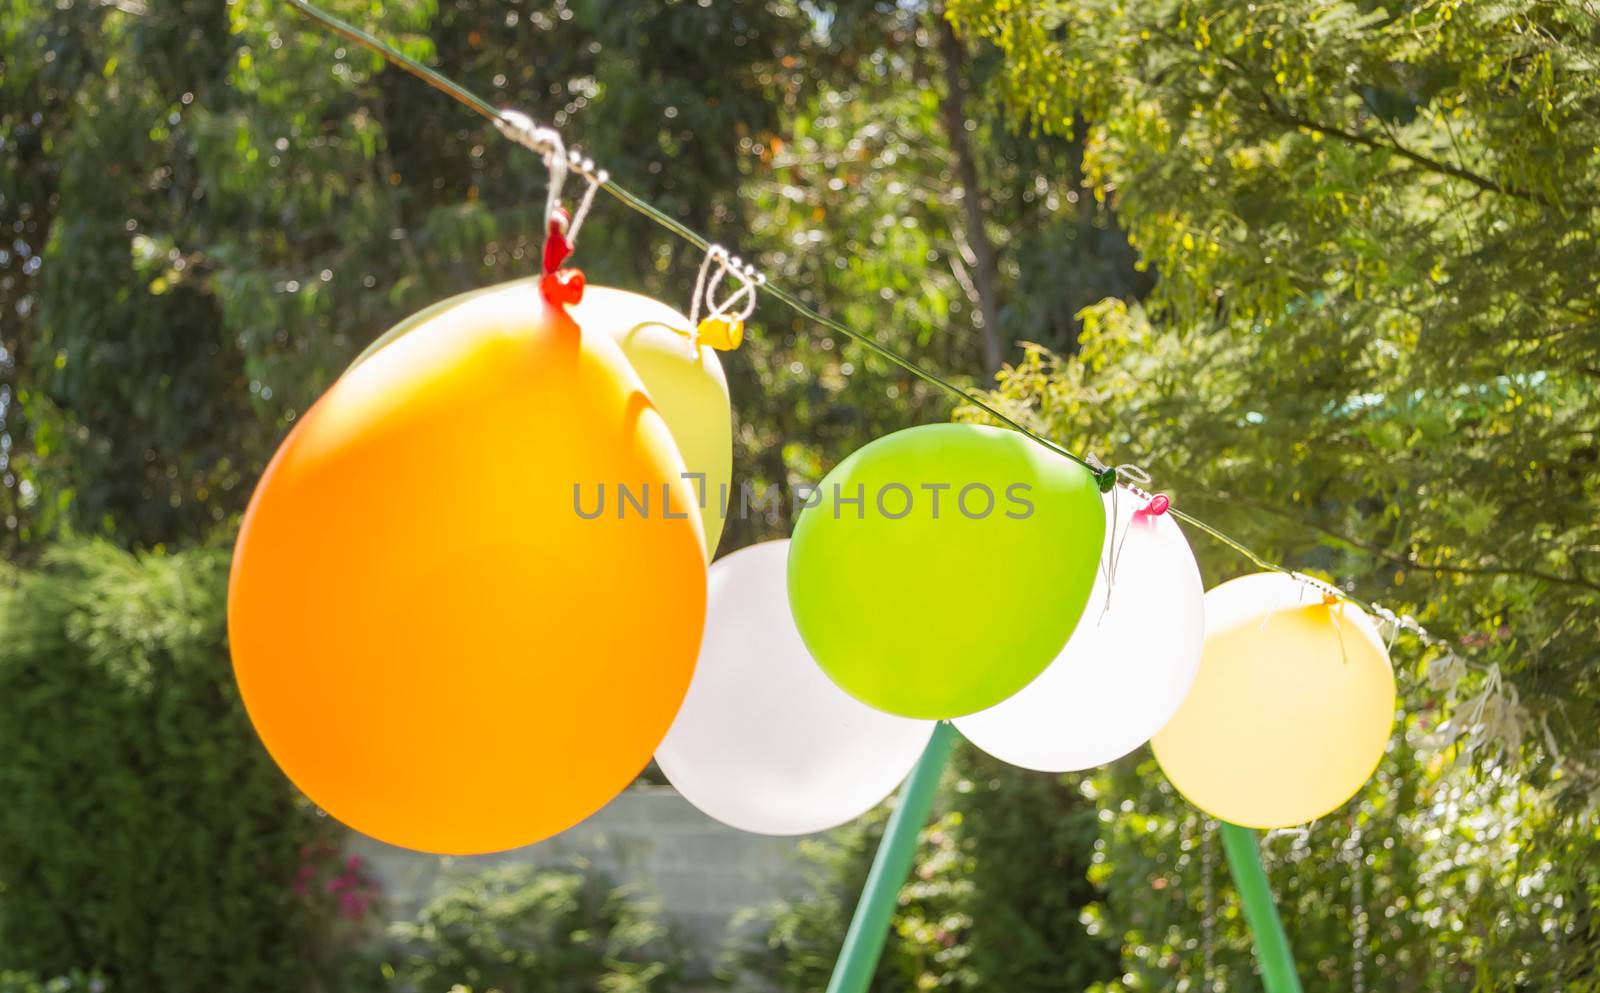 Balloons for games in a childhood garden party by doble.d